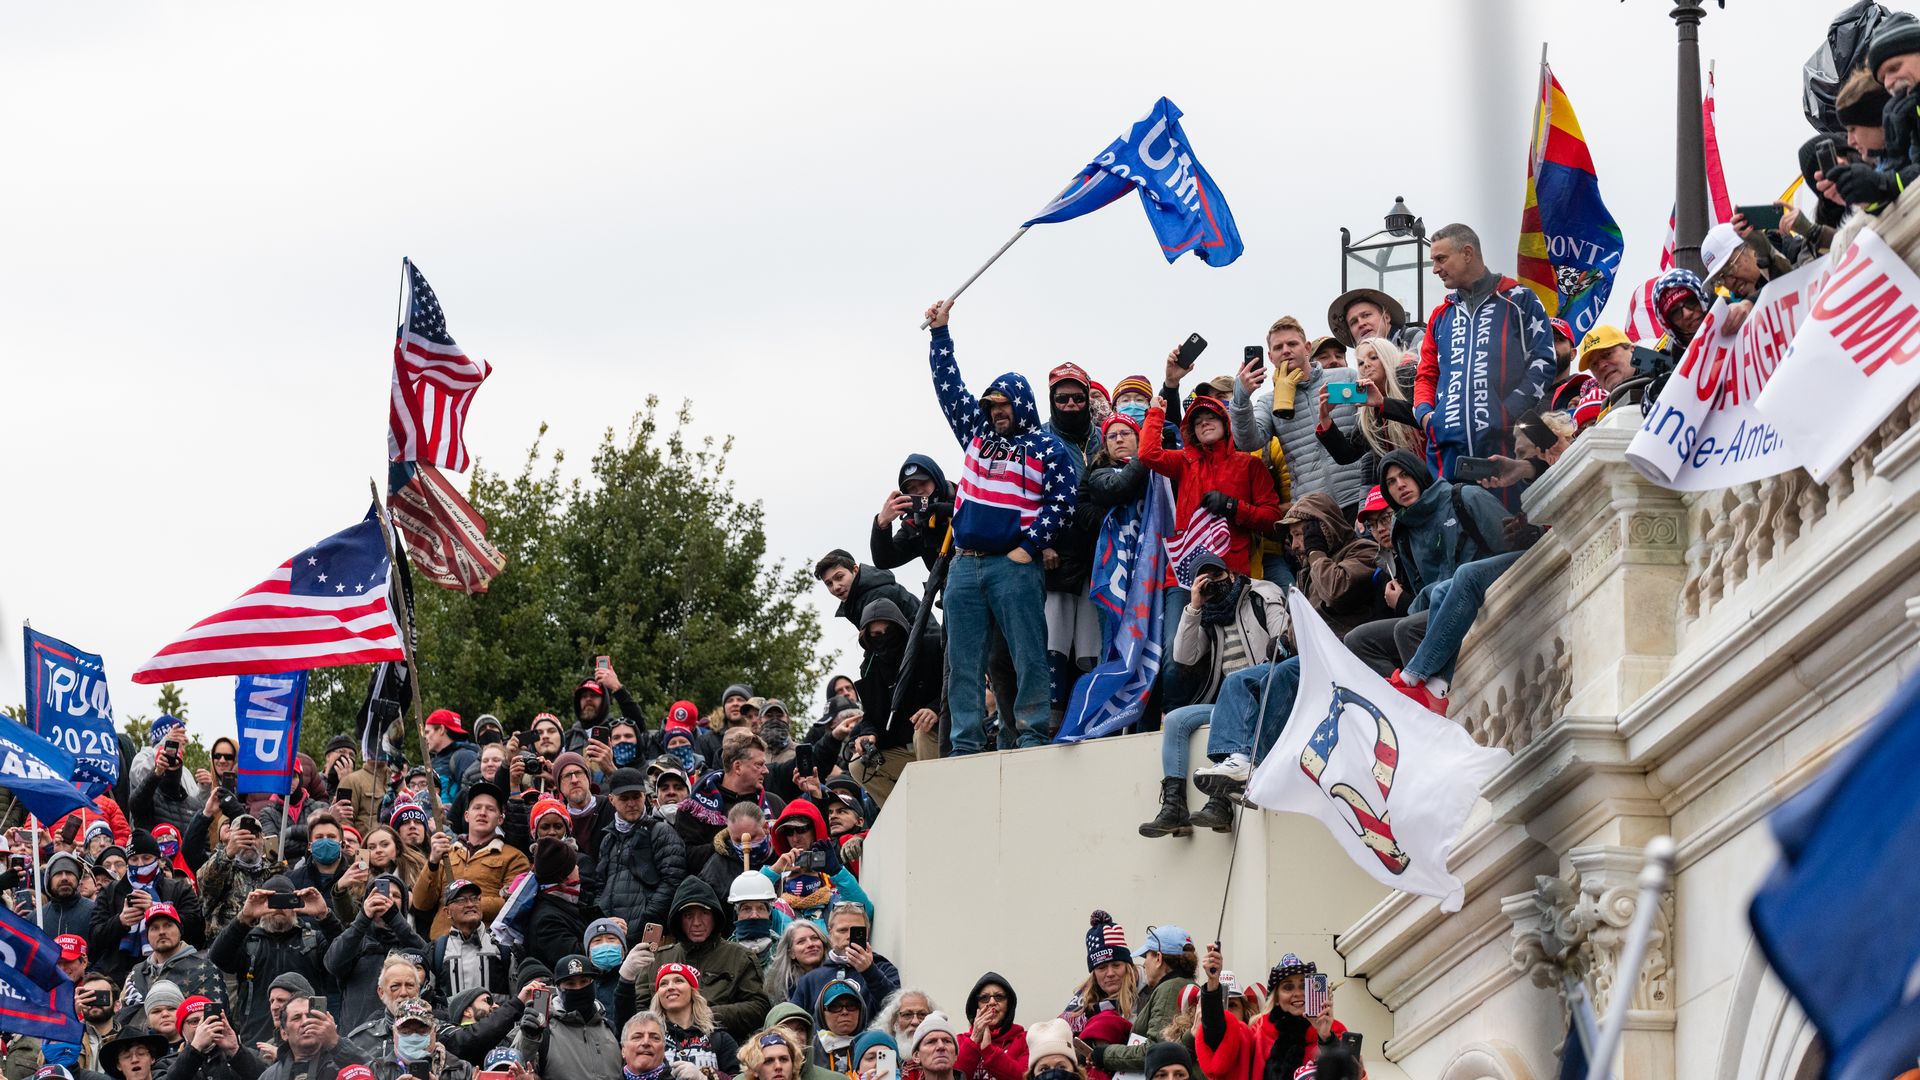 Demonstrators swarm the U.S. Capitol building during a protest in Washington, D.C., U.S., on Wednesday, Jan. 6, 2021.